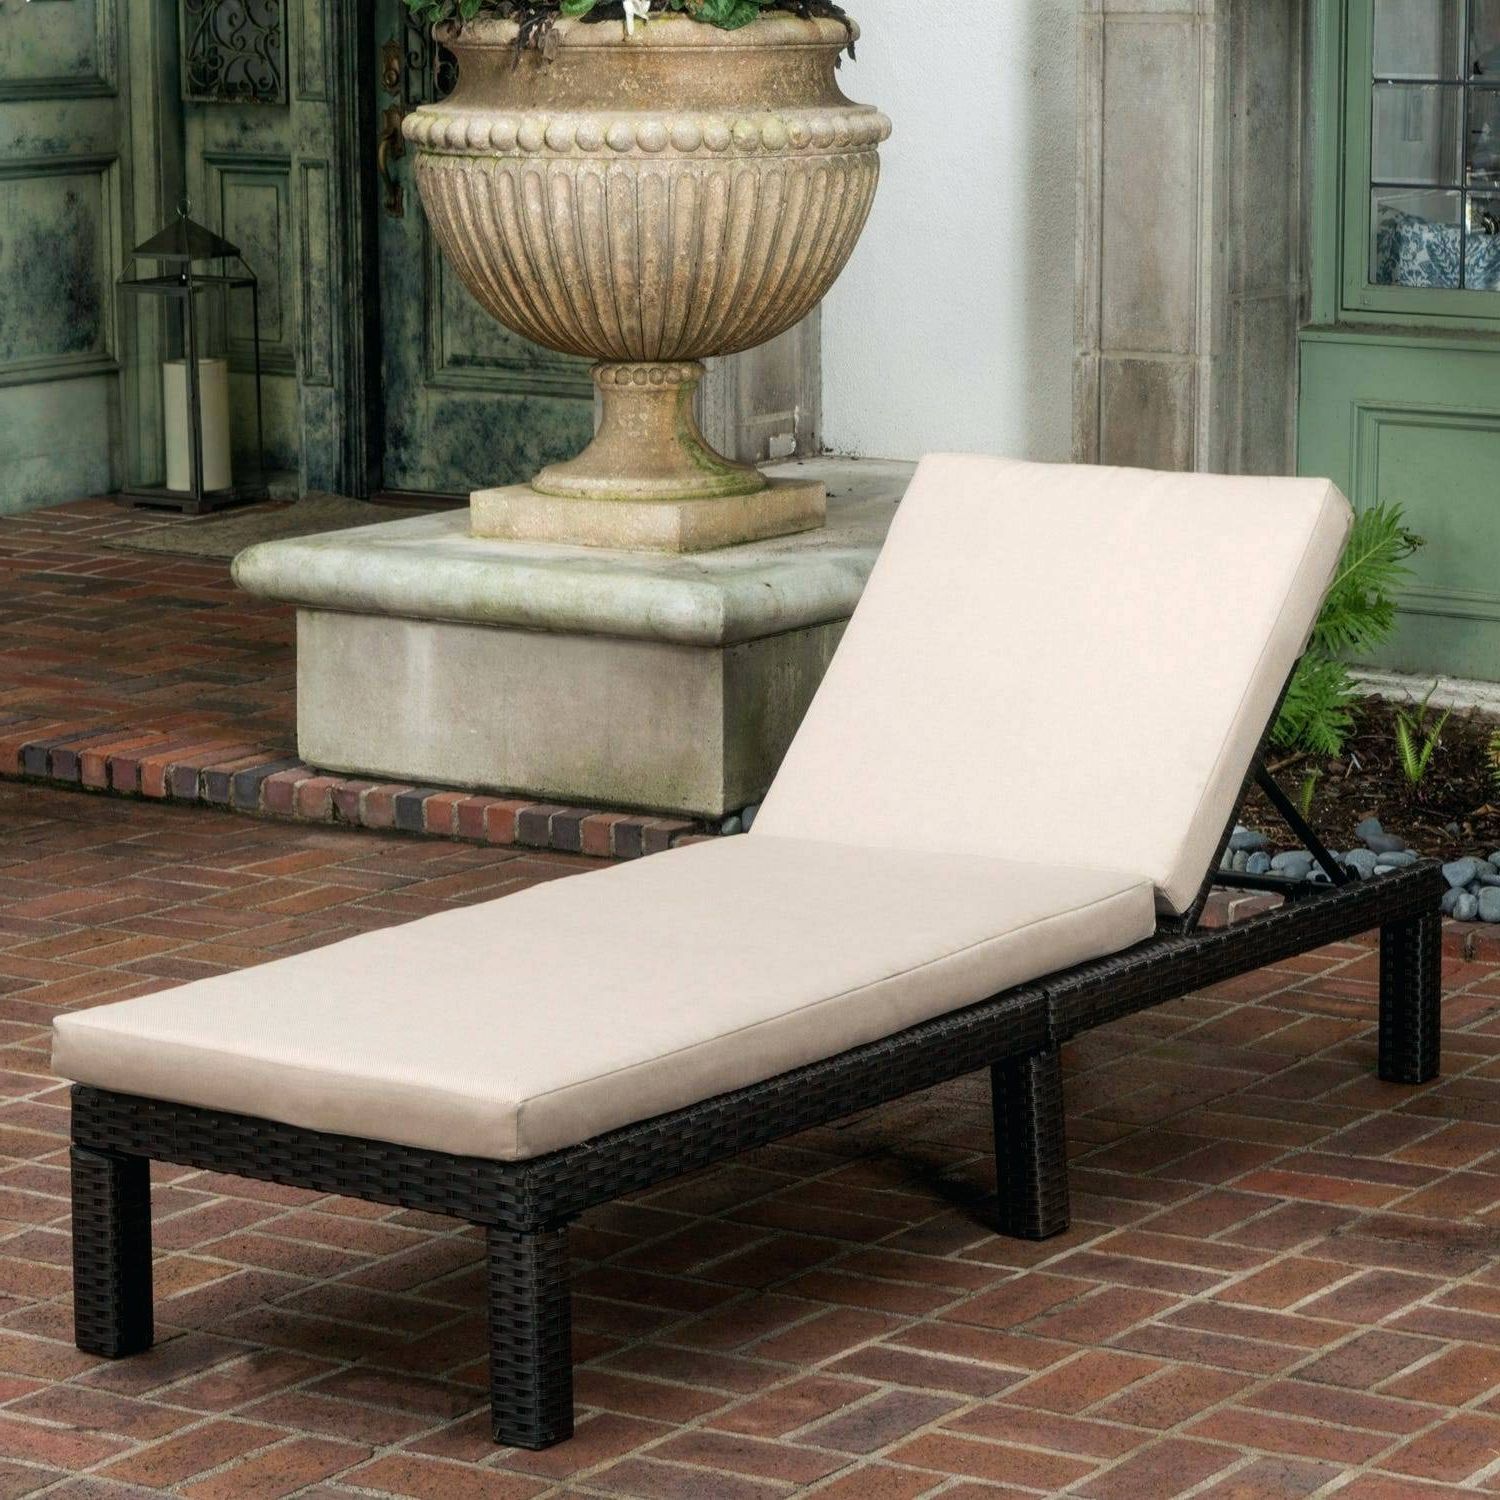 Hampton Outdoor Chaise Lounges Acacia Wood And Wicker For Most Current Wicker Chaise Lounge – Billbagz (View 23 of 25)